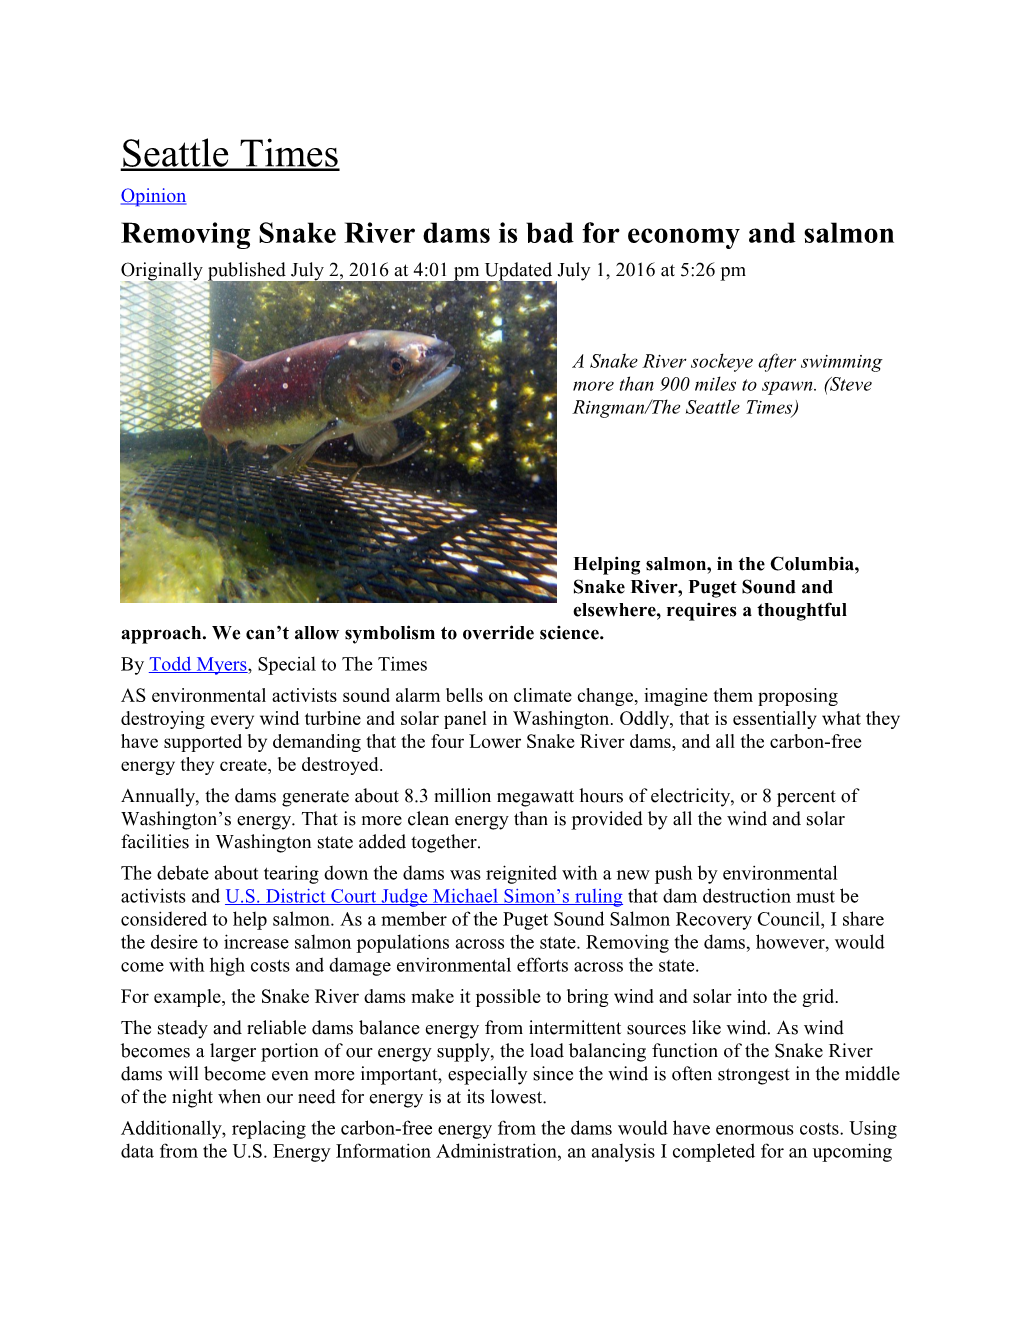 Removing Snake River Dams Is Bad for Economy and Salmon